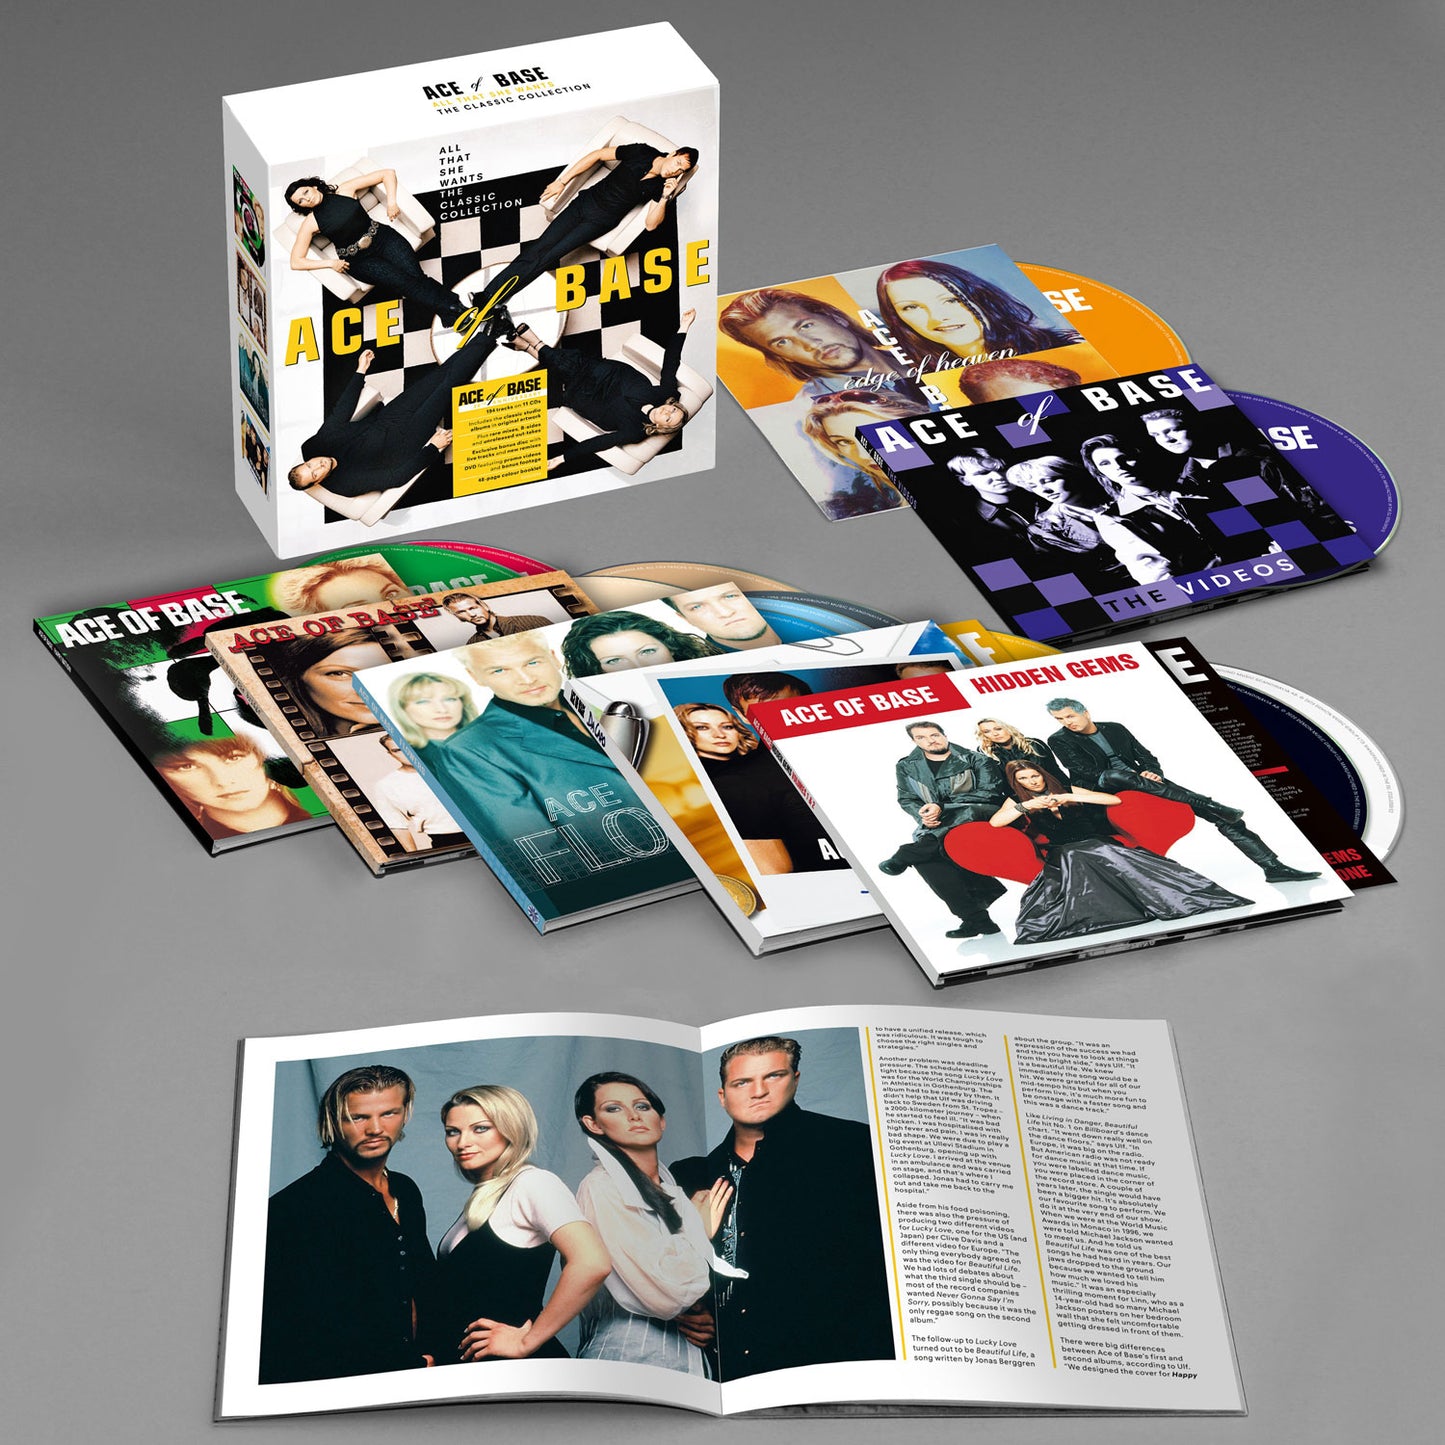 Ace Of Base / All That She Wants: The Classic Collection 11CD+DVD box set